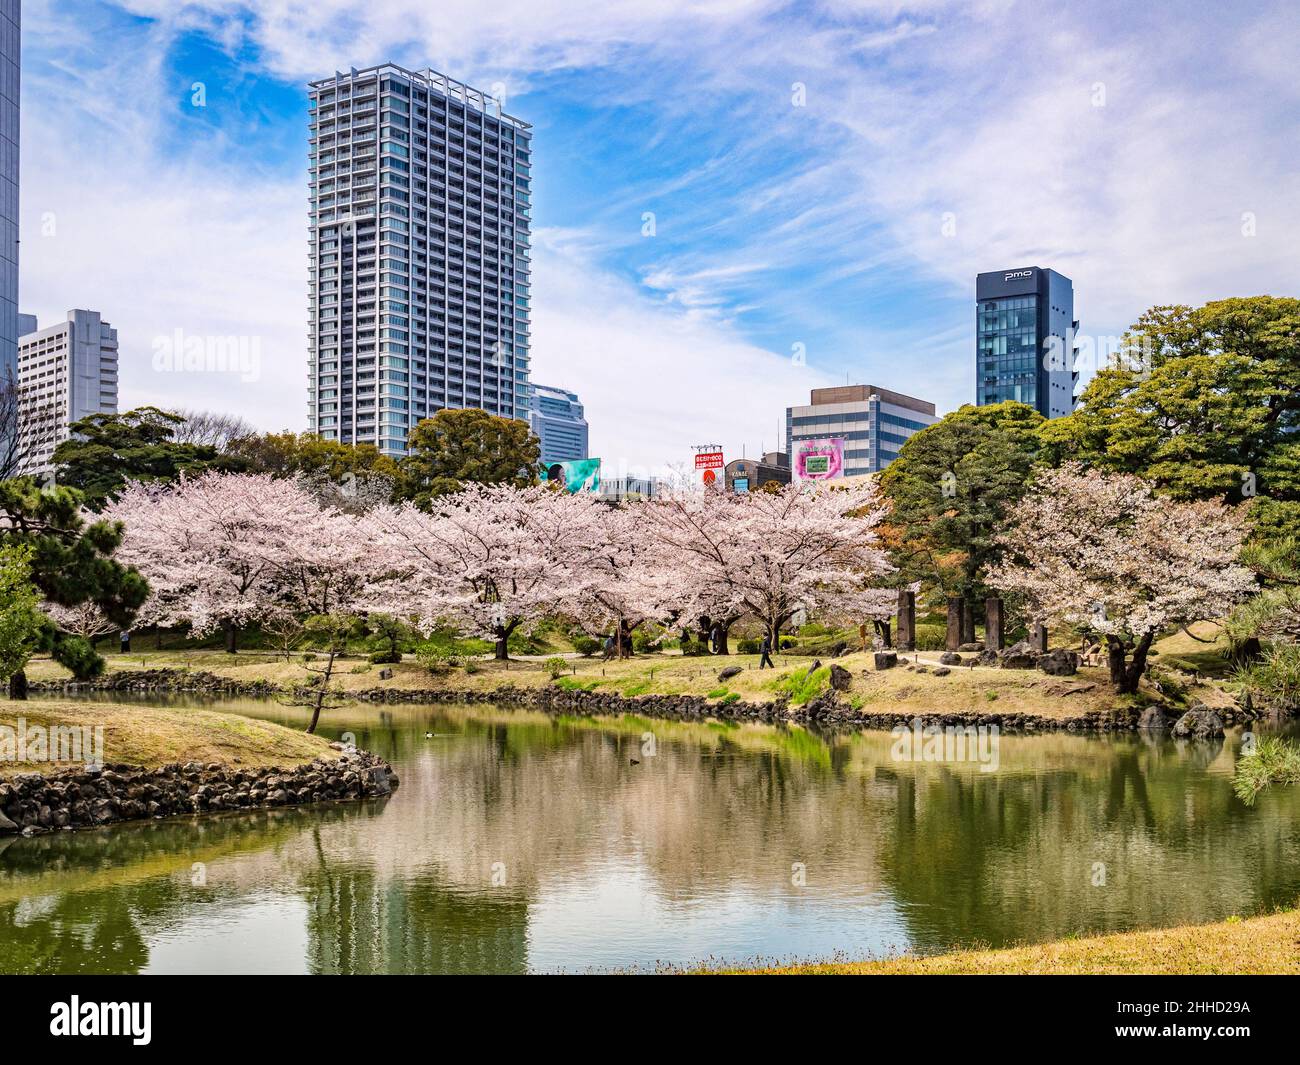 5 April 2019: Tokyo, Japan - Lake and cherry blossom in Kyu-Shiba-rikyu Gardens, a traditional style landscape garden in central Tokyo. Stock Photo